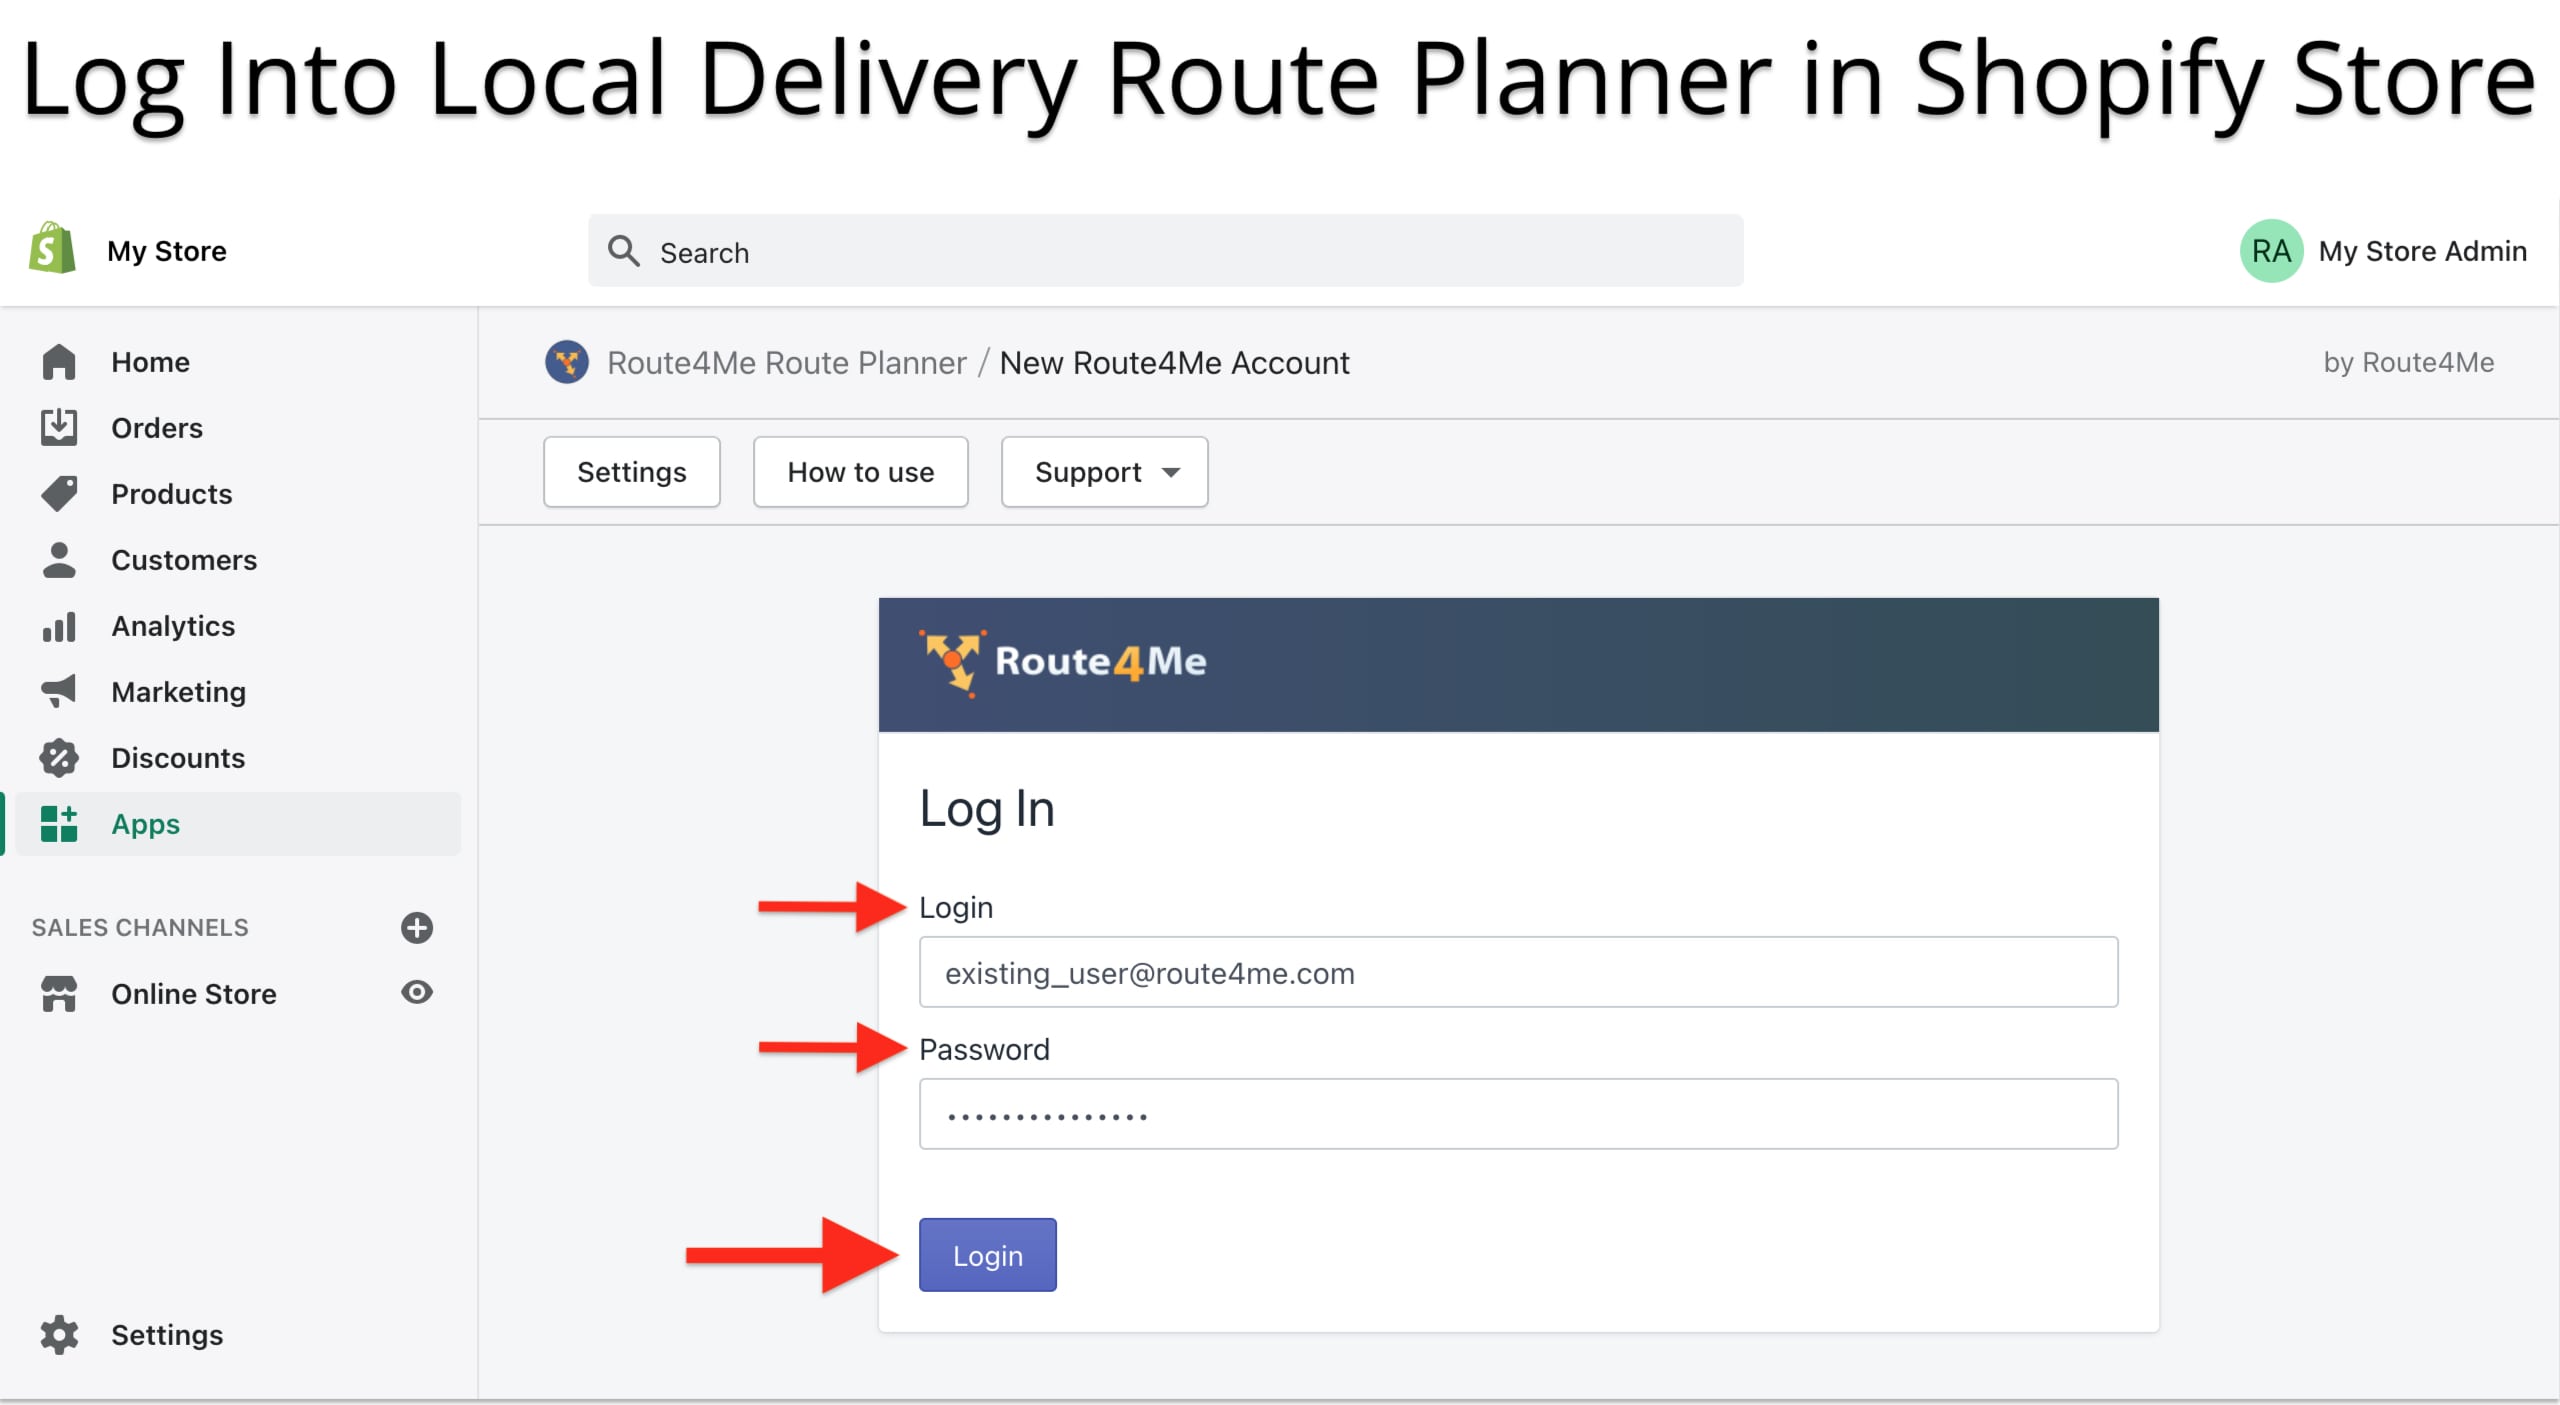 Log into your Route4Me account to use Shopify Local Delivery Route Planner in your online store.